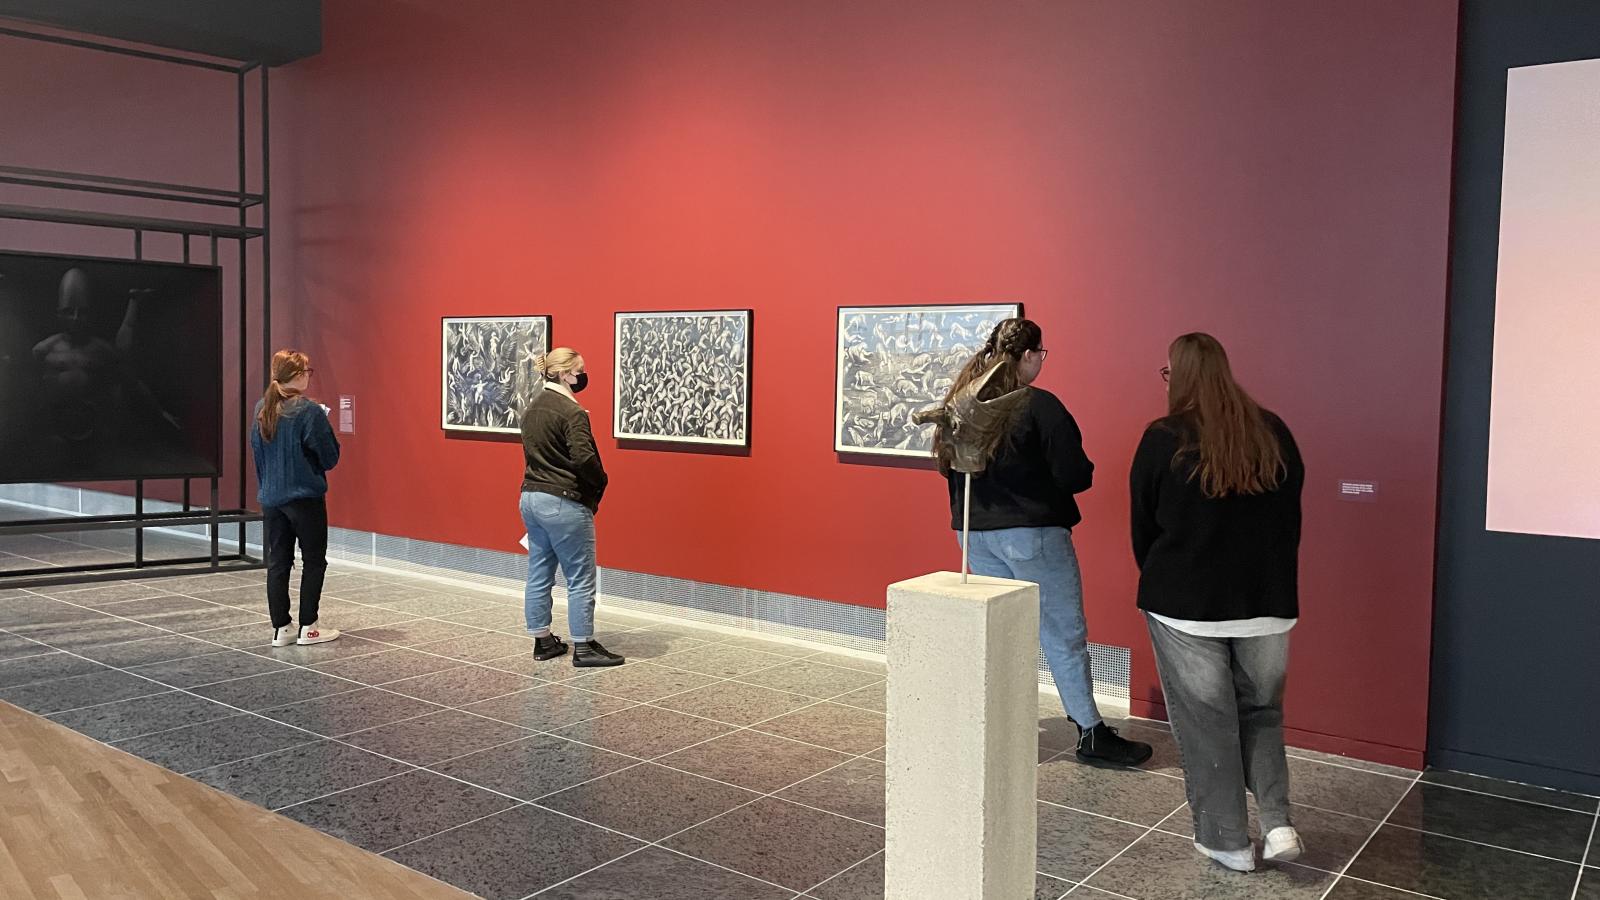 Students observing the artwork in the Wexner Center for the Arts. 